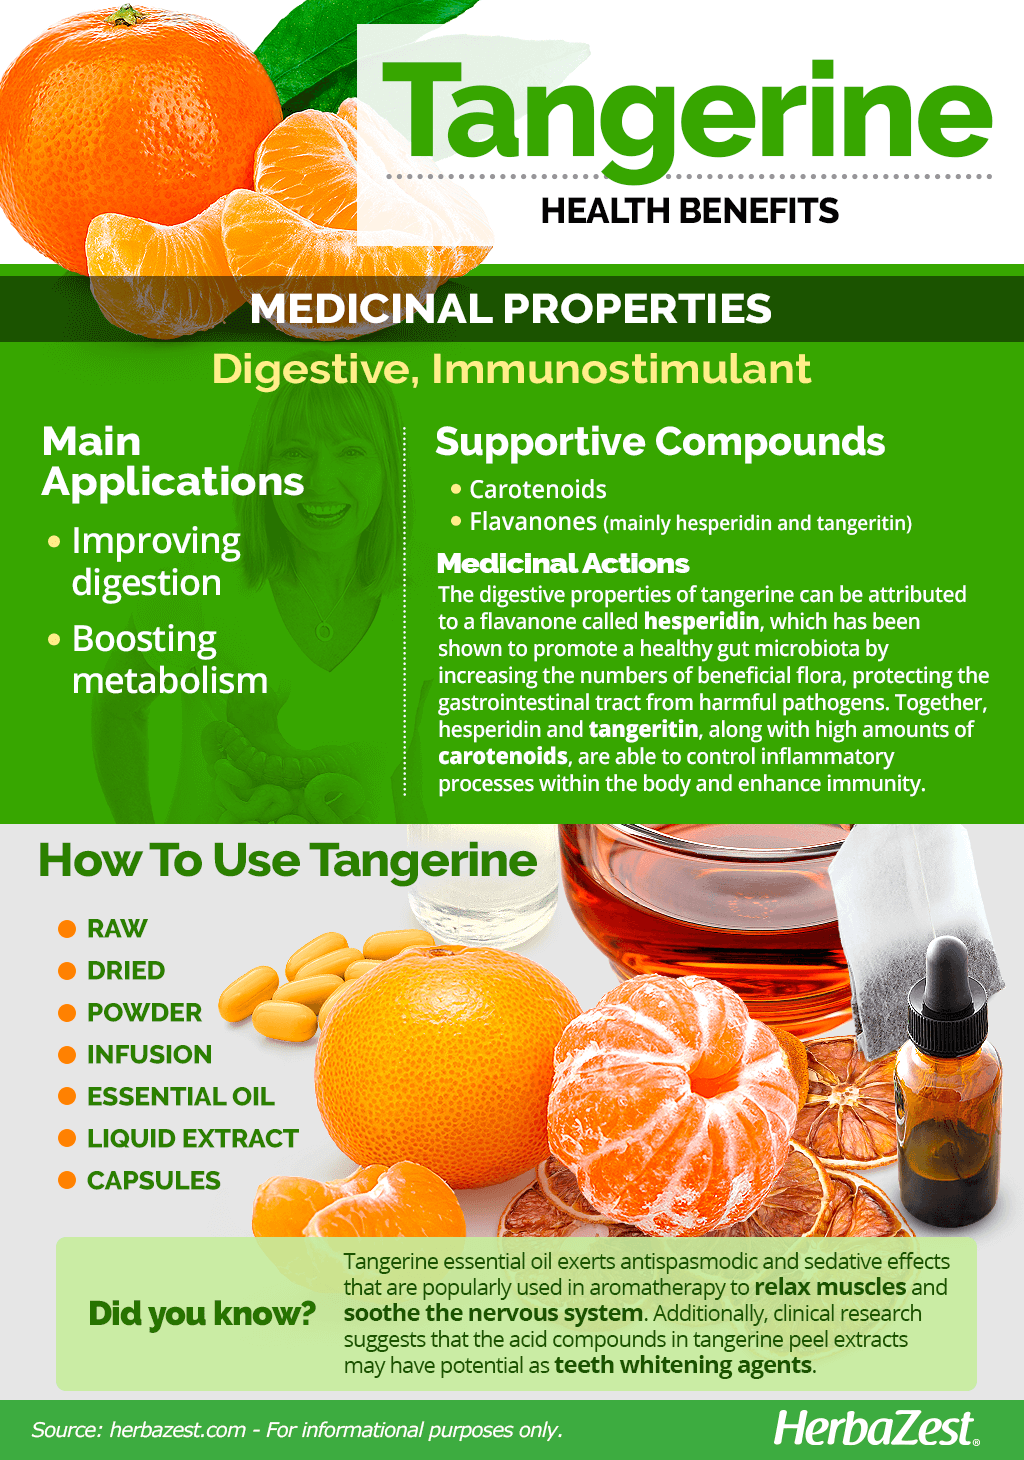 Tangerine Nutrition Facts and Health Benefits